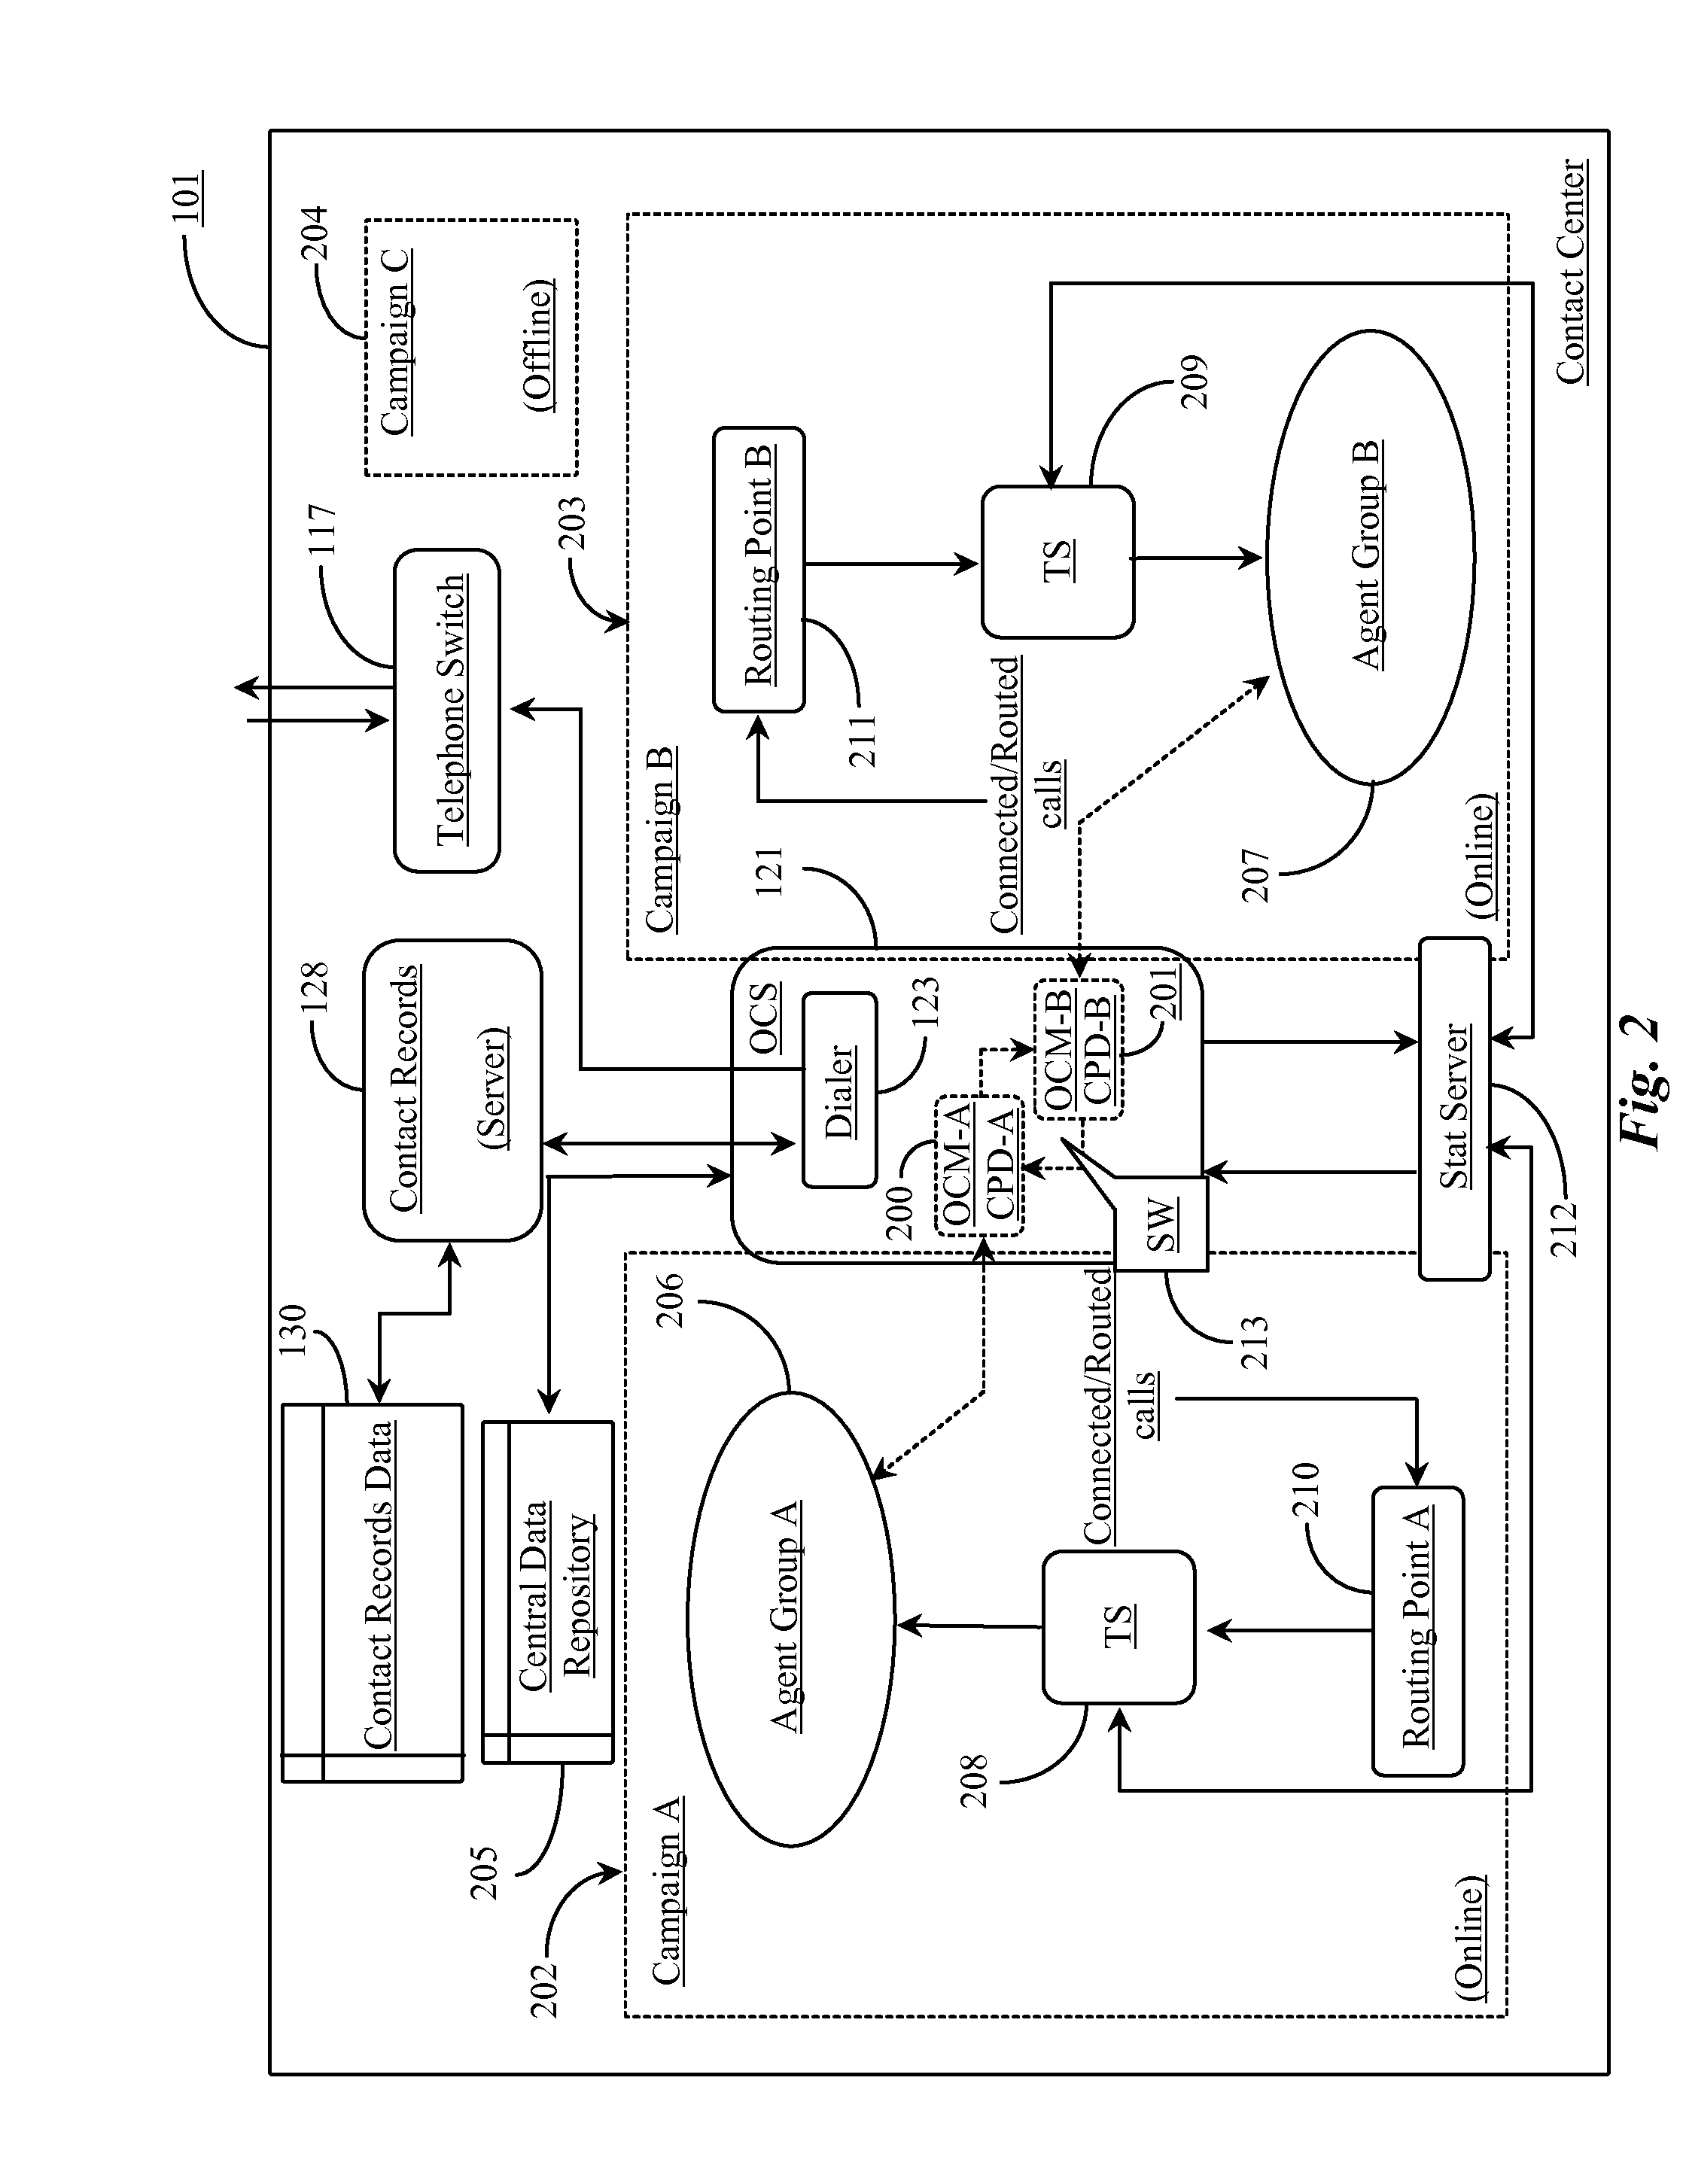 Collaboration System and Method